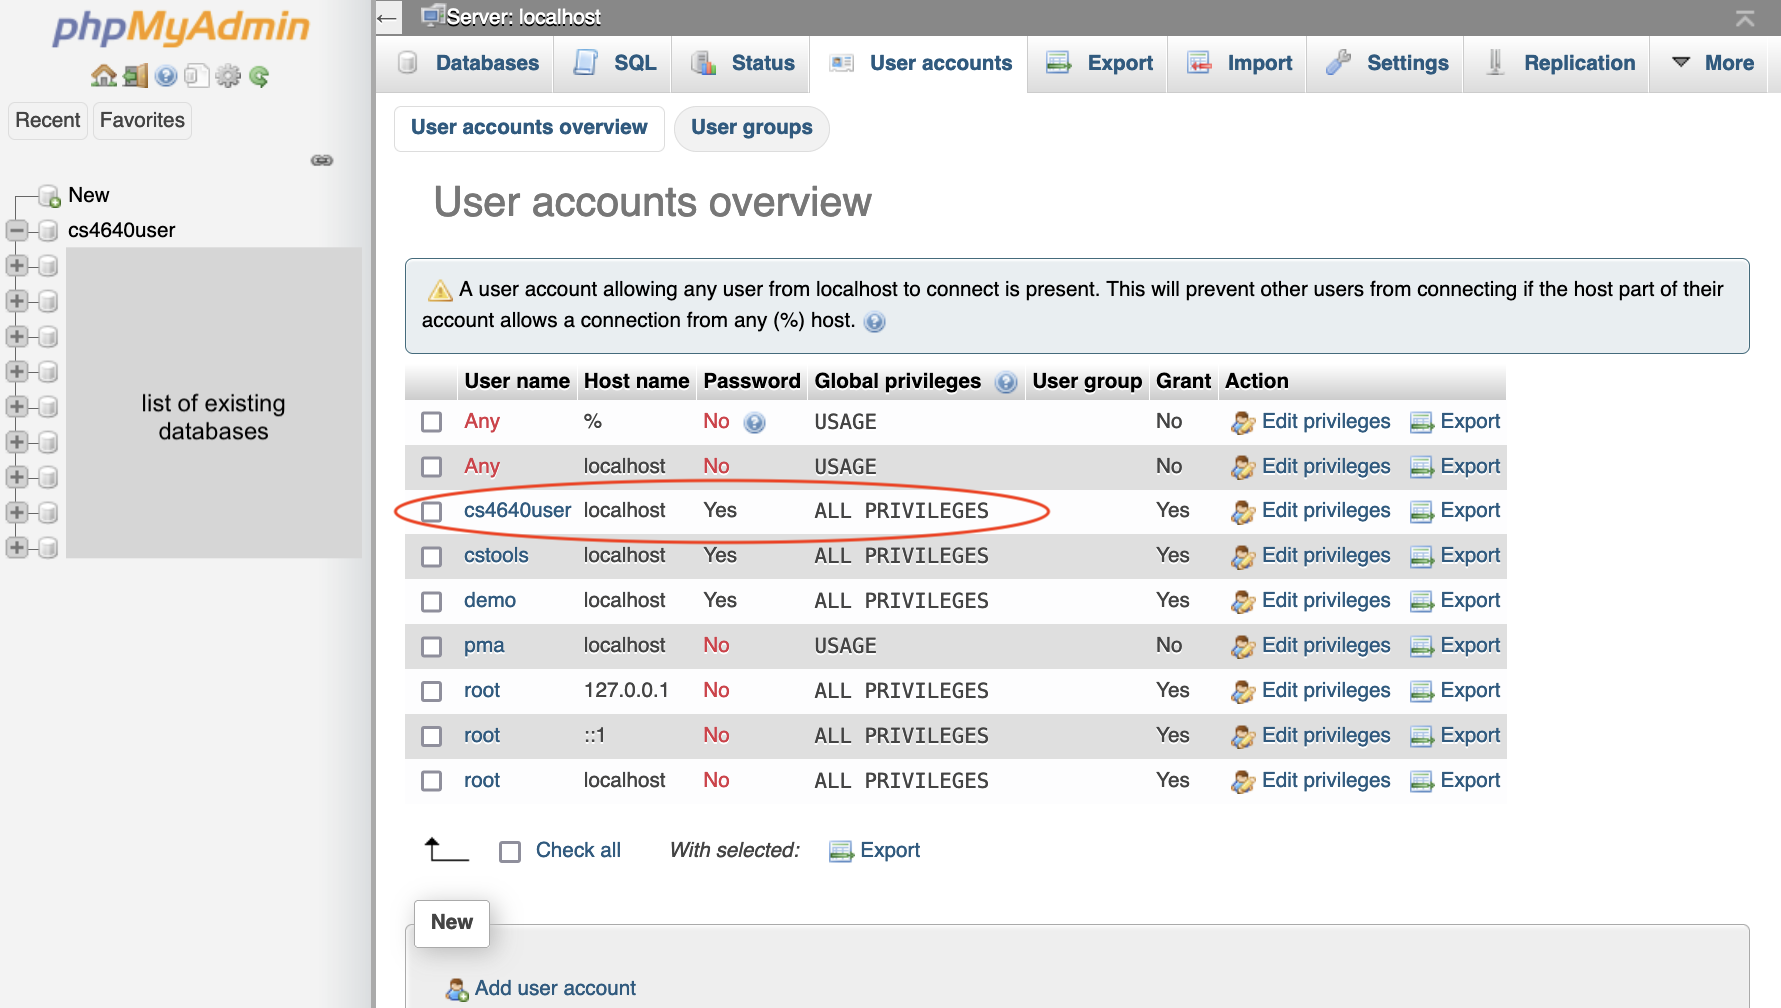 sample screen showing the account has been created